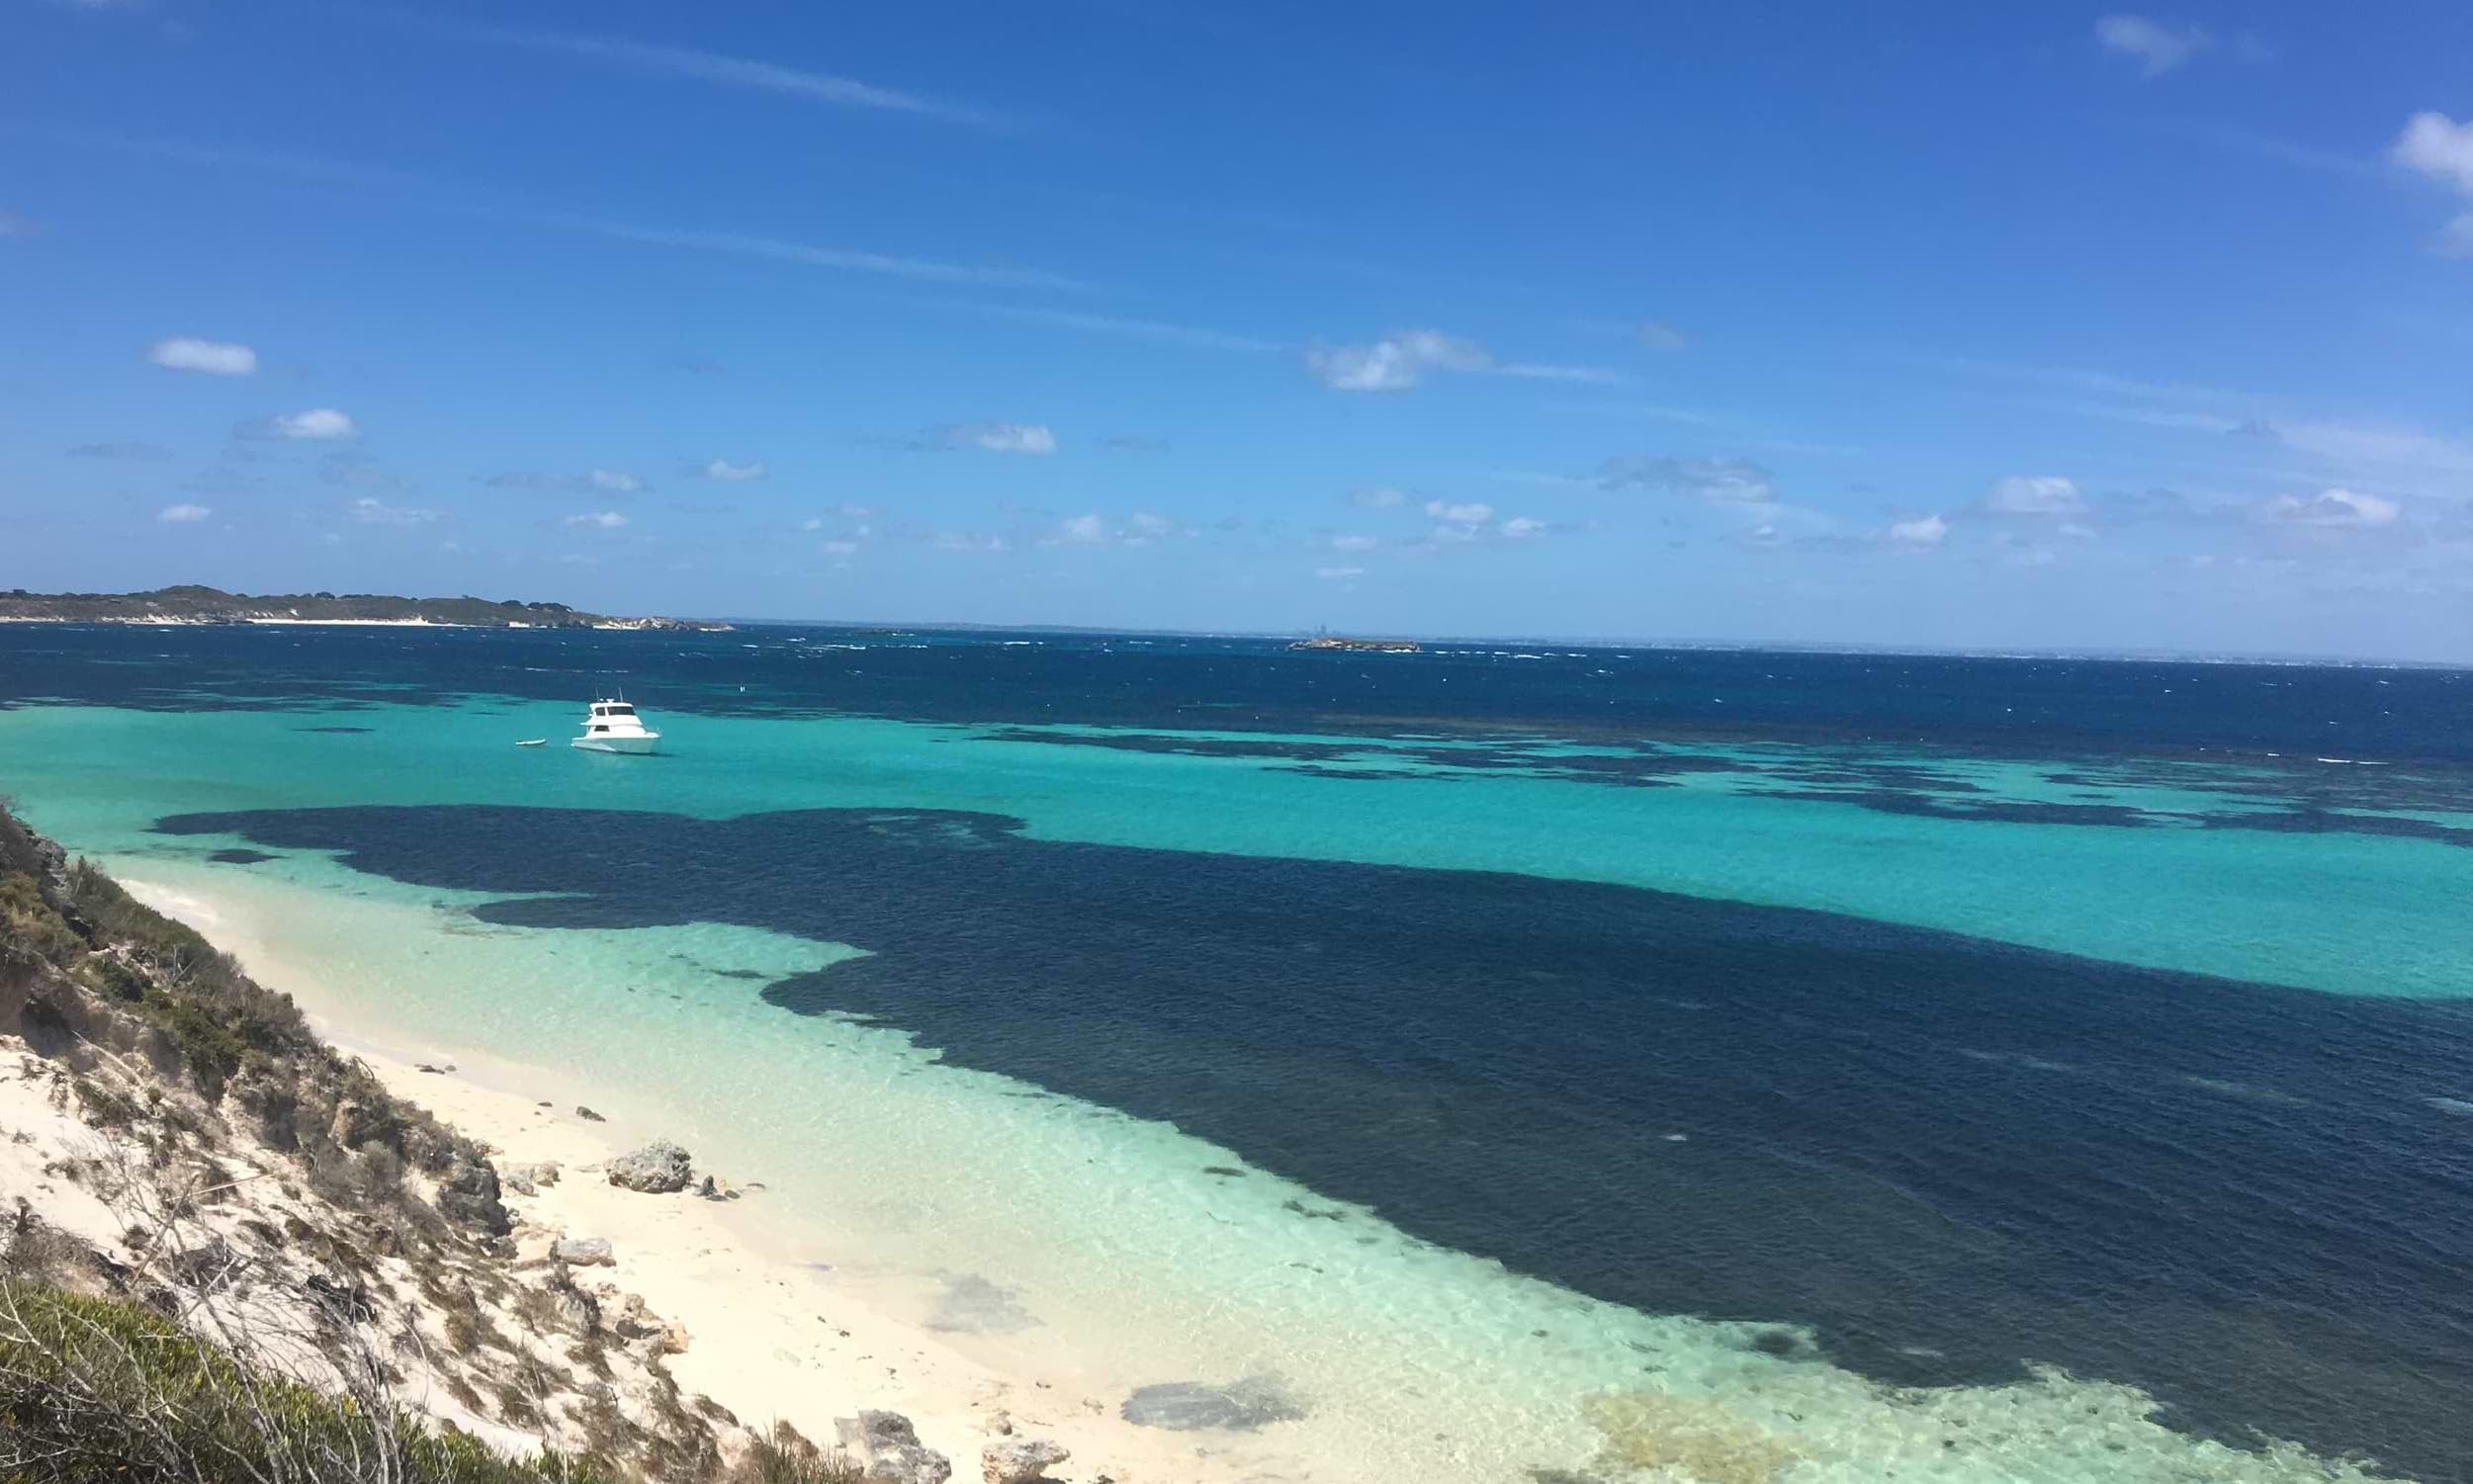 The view from Rottnest Island of the sea